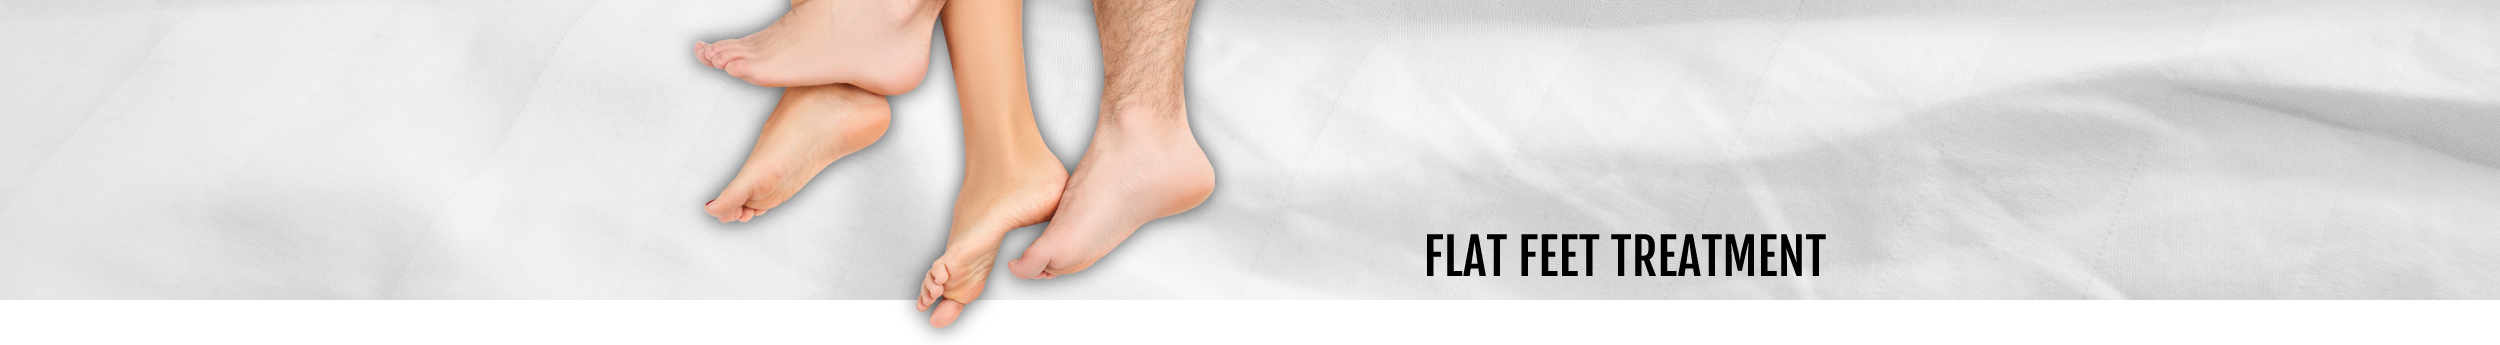 Flat feet treatment header for the Walk IN Foot Clinic in central London